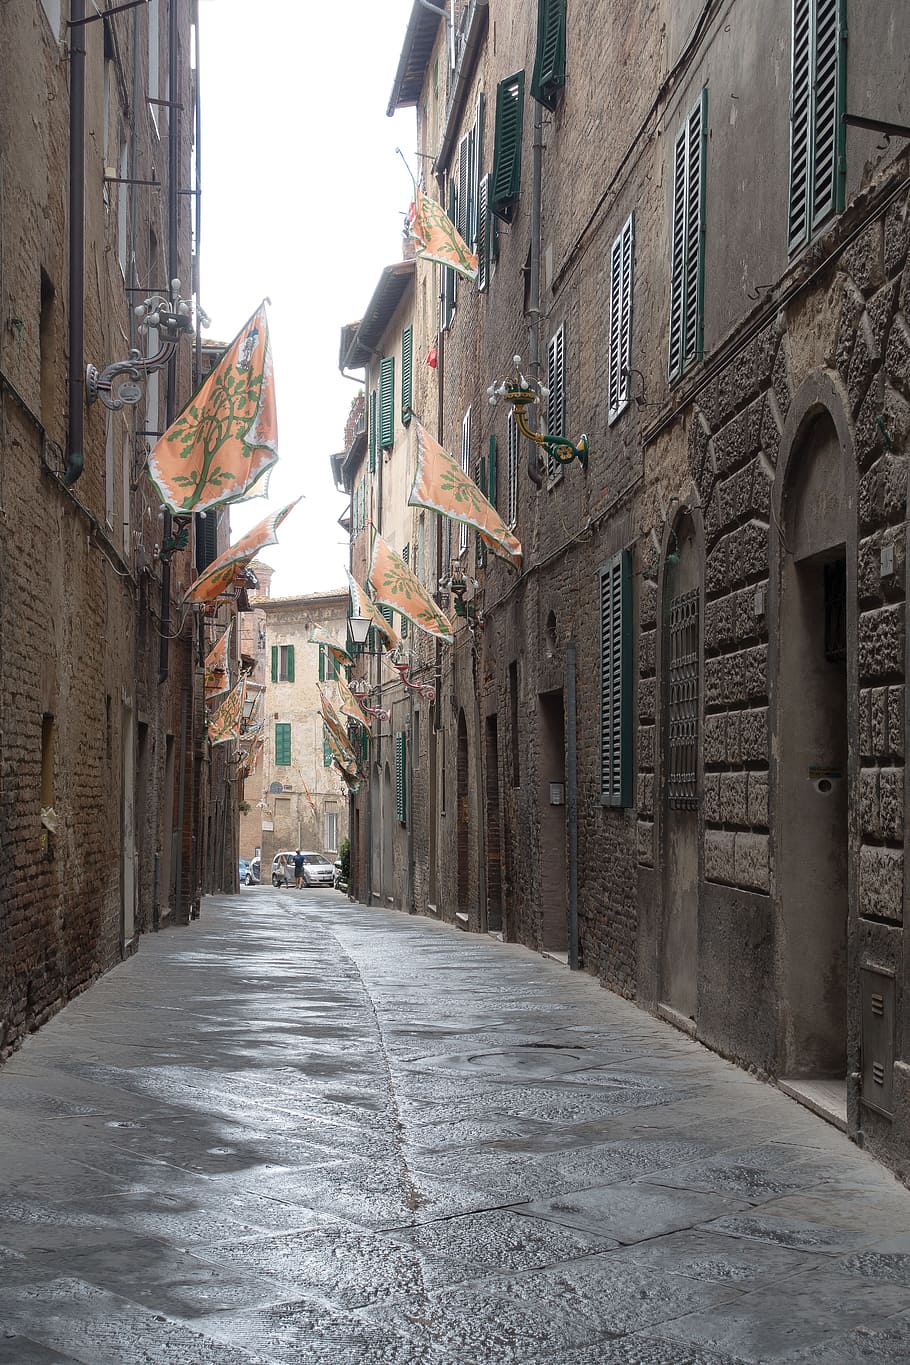 alleyway during daytime, alley, middle ages, siena, italy, houses gorge, medieval, old, eng, building